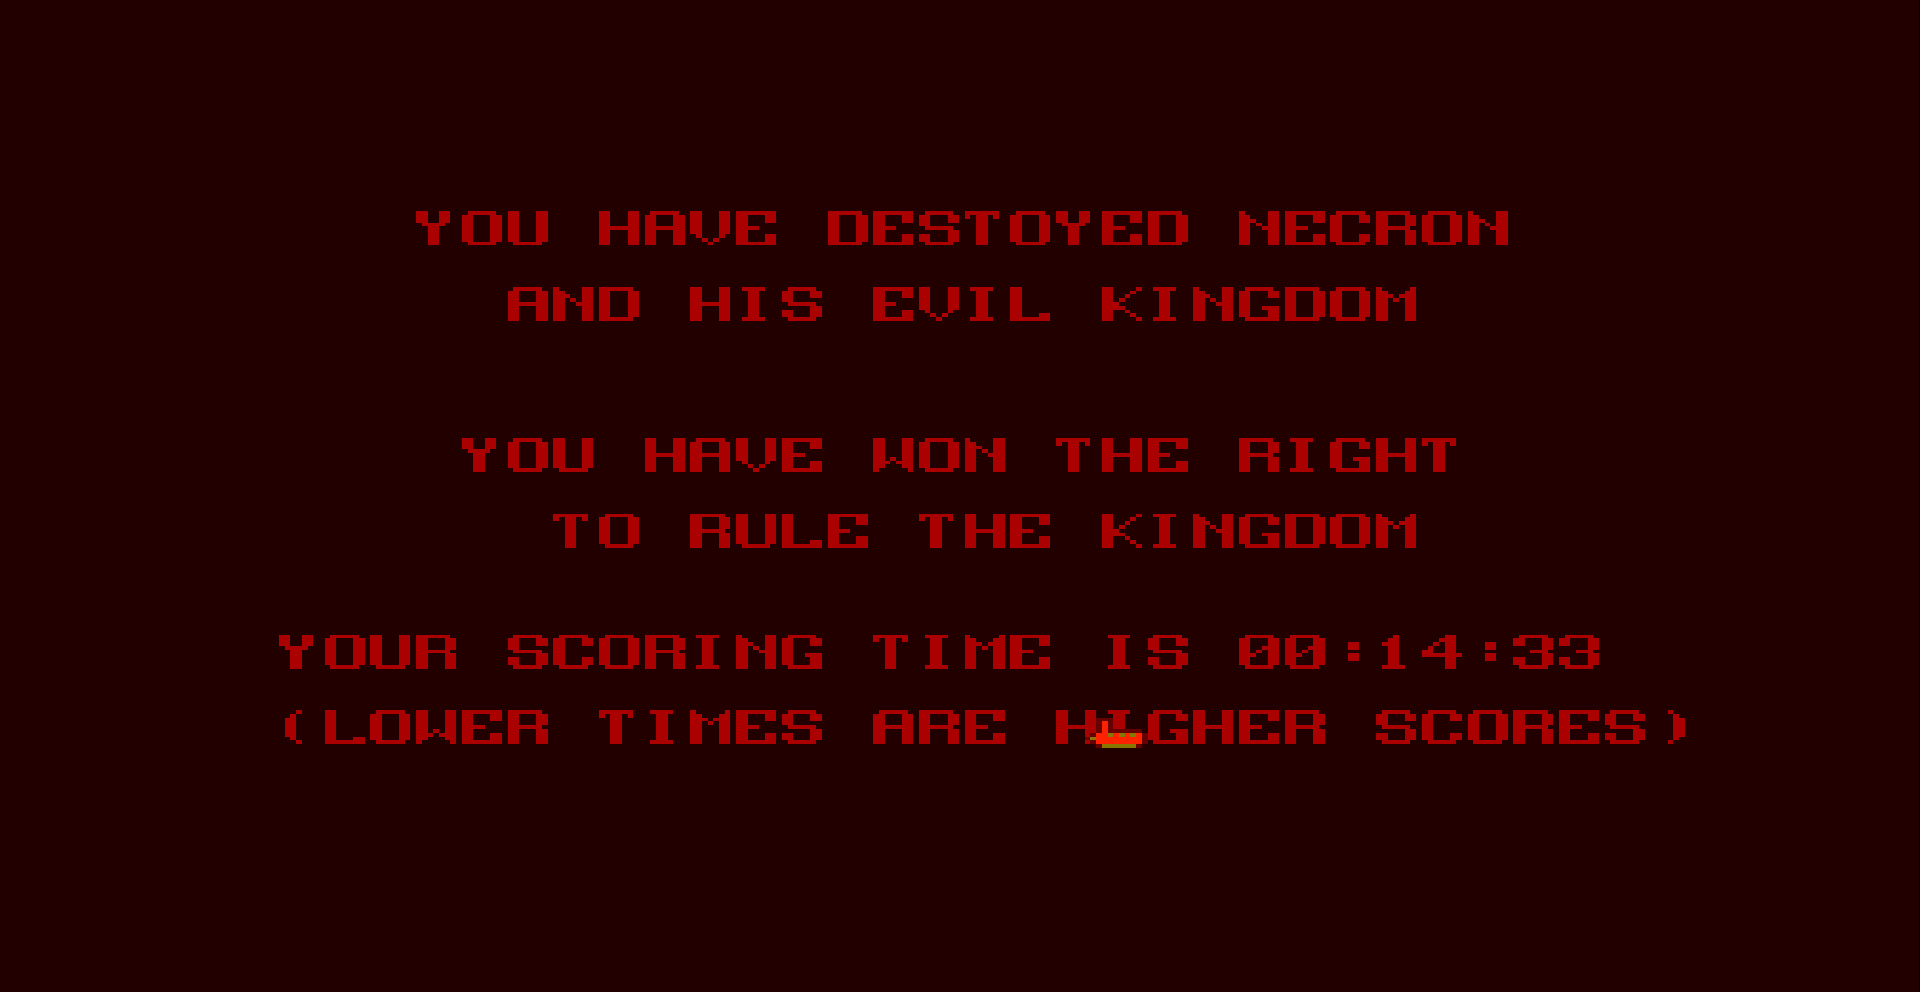 TheTrickster: Barbarian [Psygnosis] [Completed Game Scoring Time] (Amiga Emulated) 0:14:33 points on 2016-11-12 21:19:28